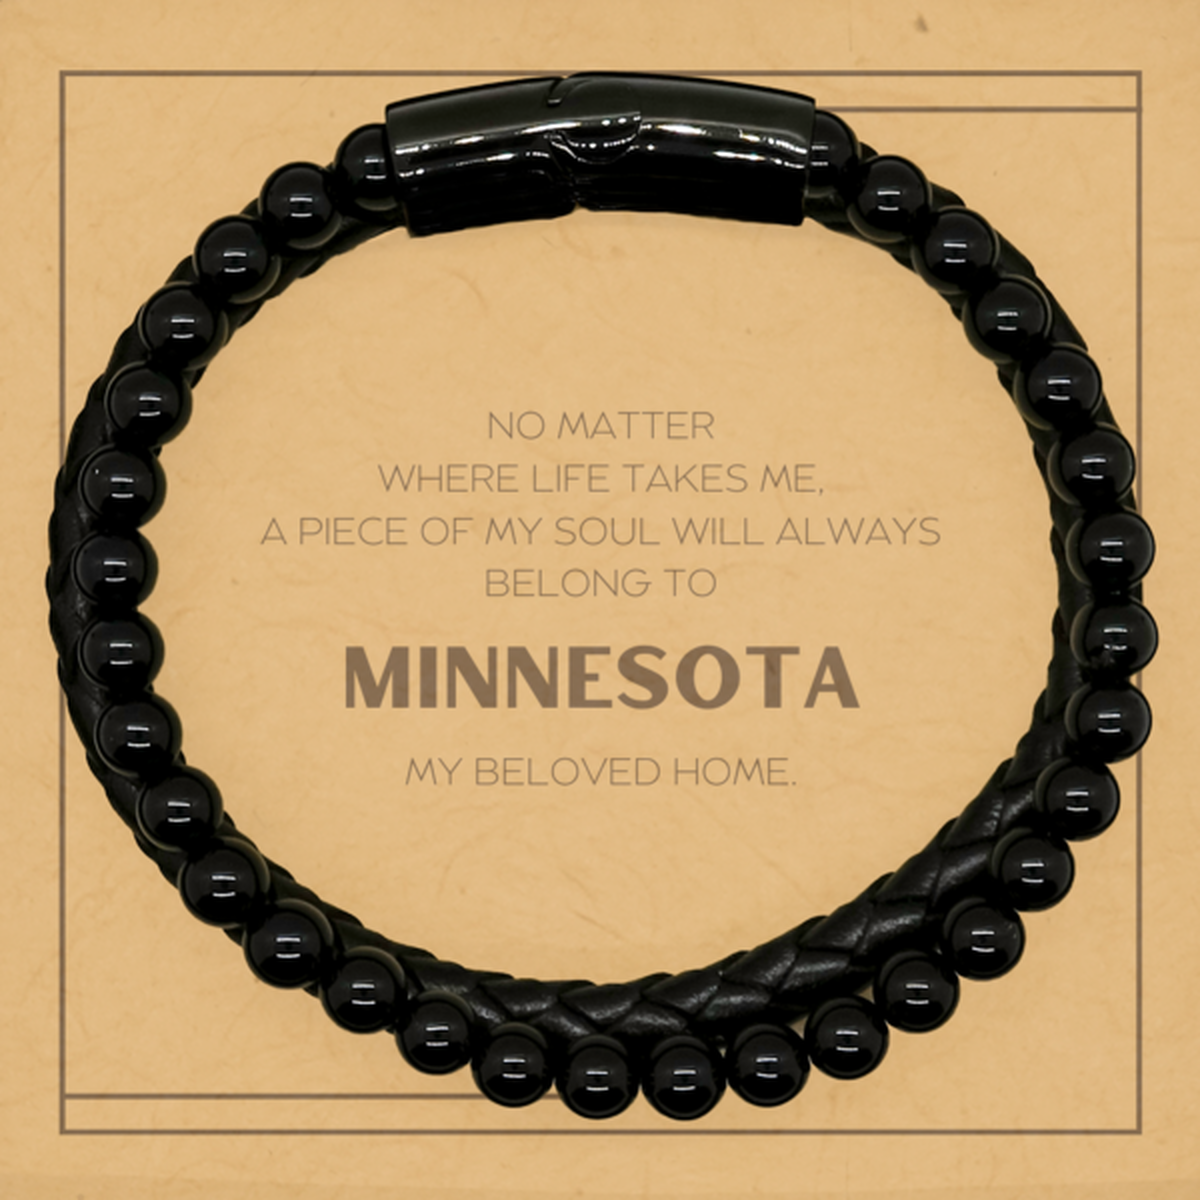 Love Minnesota State Gifts, My soul will always belong to Minnesota, Proud Stone Leather Bracelets, Birthday Unique Gifts For Minnesota Men, Women, Friends